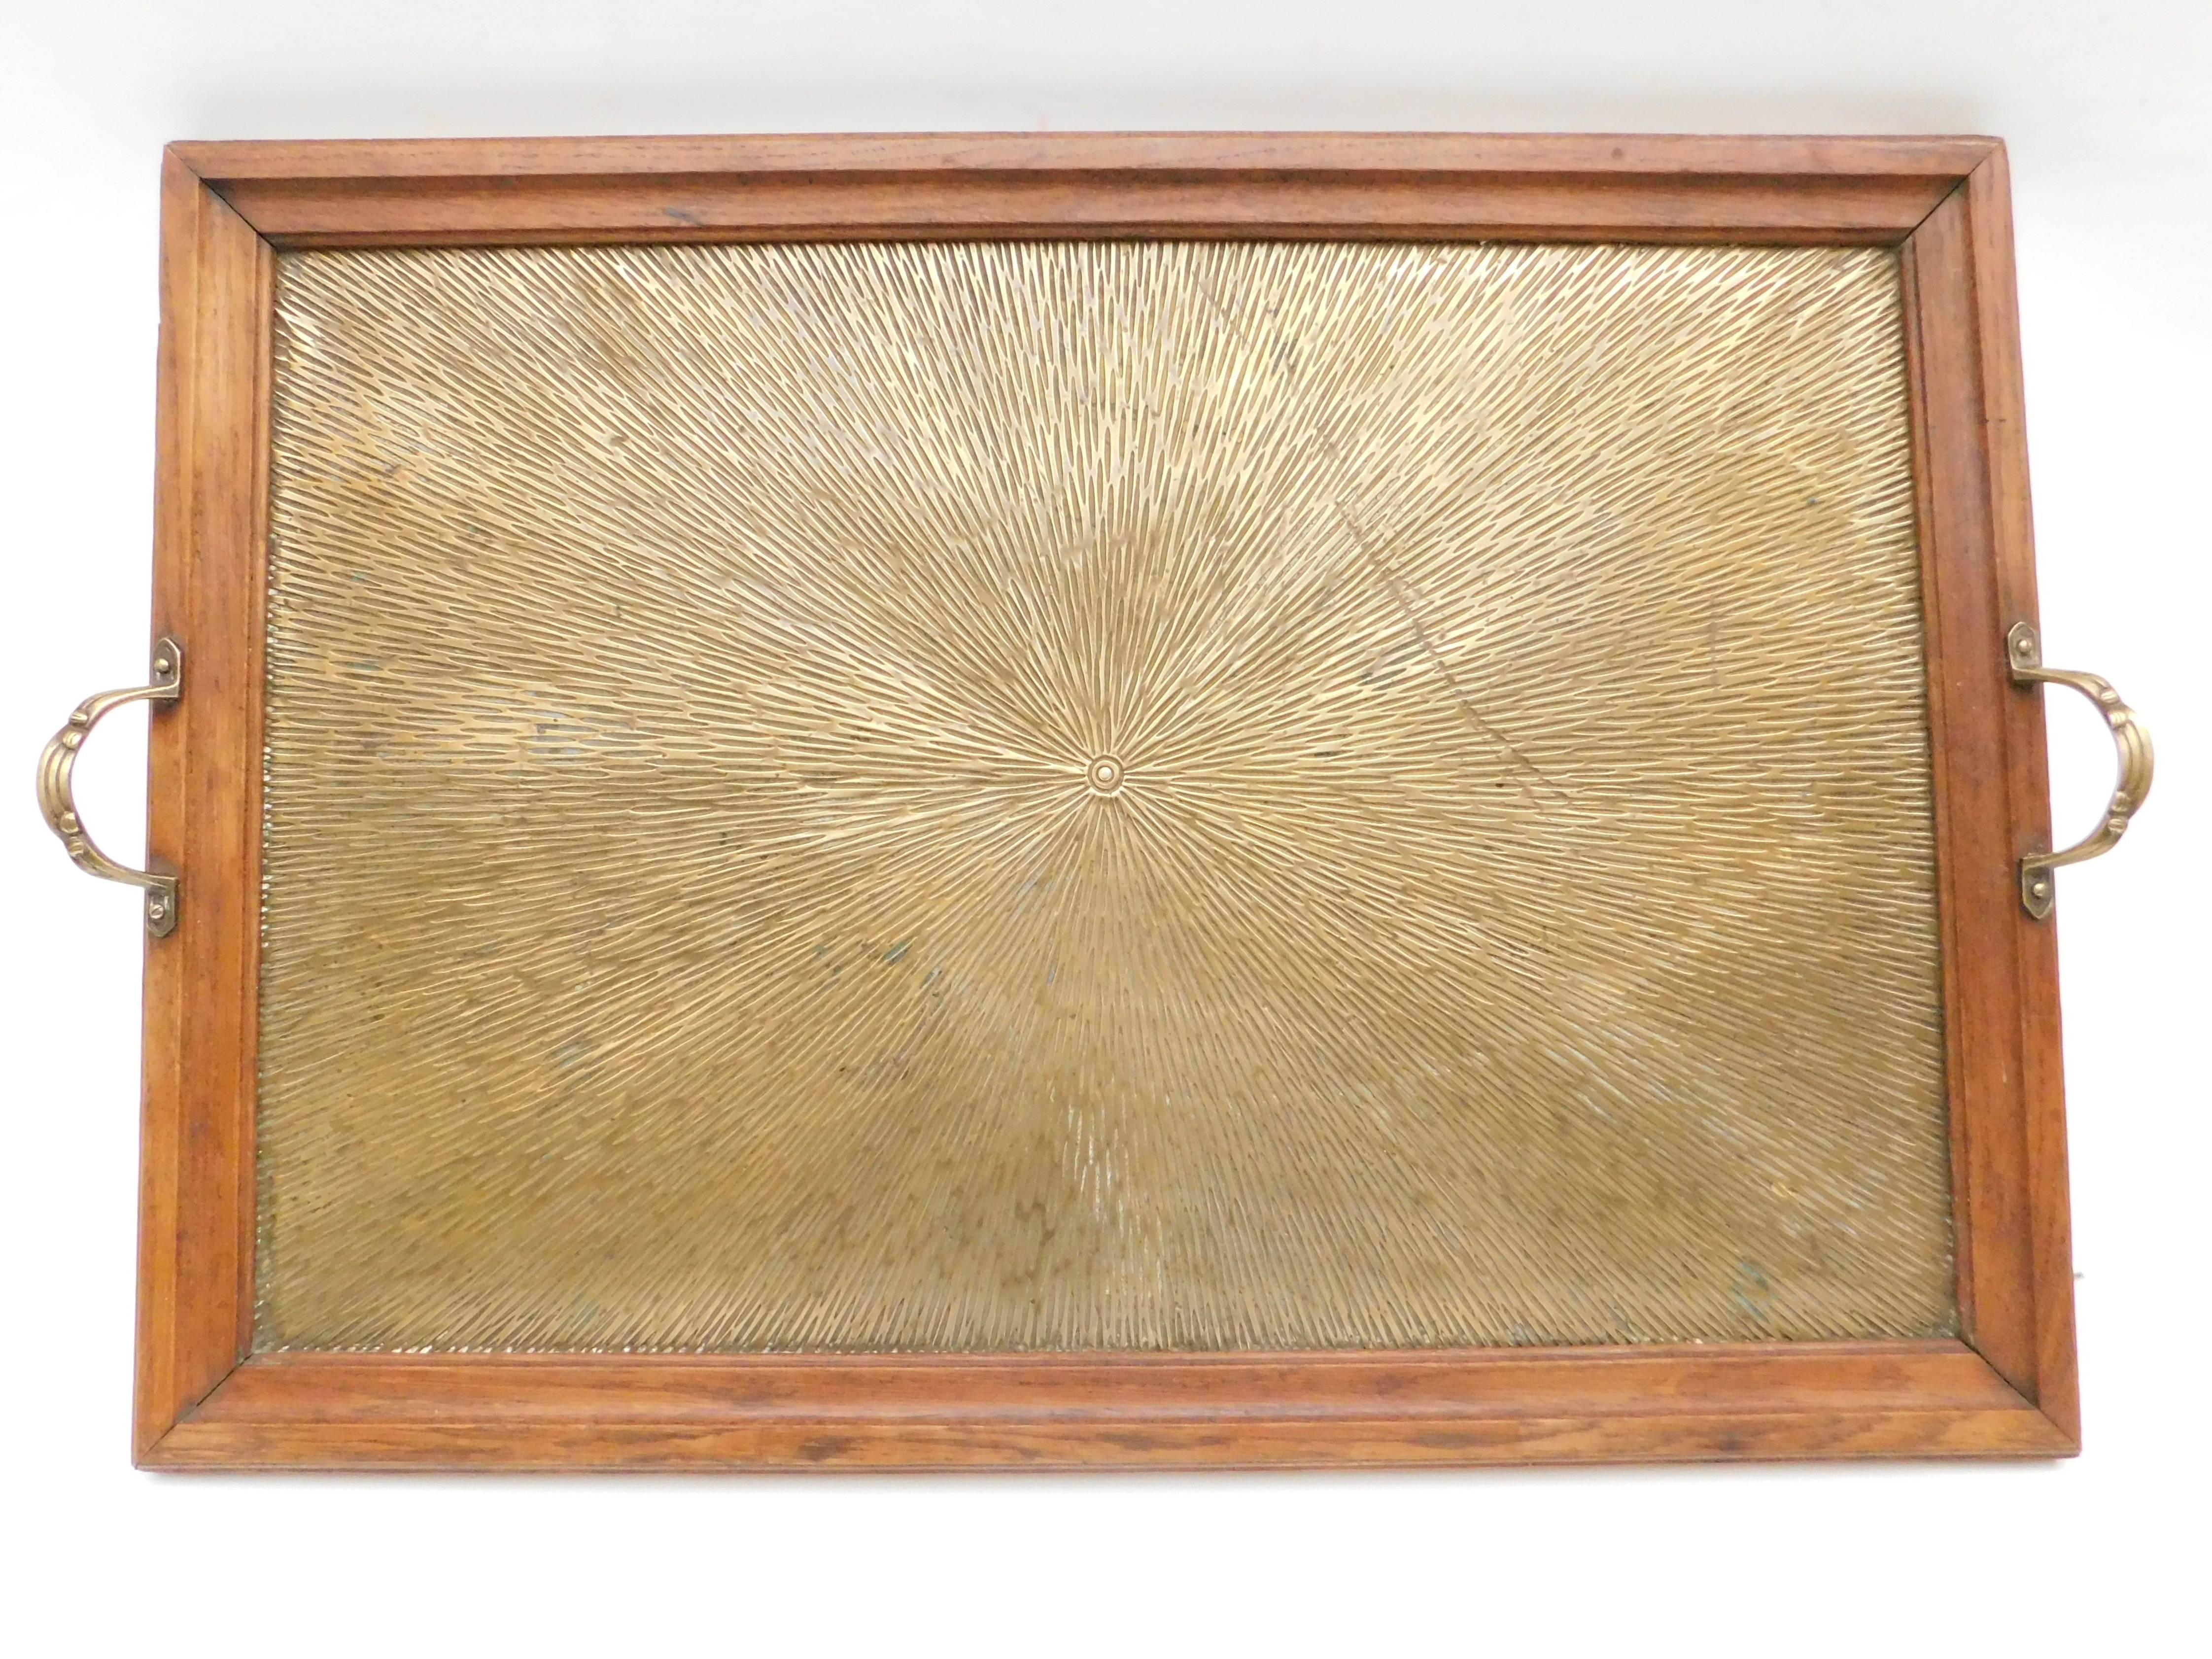 Early 20th Century 1920's Belgian Brass and Oak Art Deco Tray with Sunburst Design For Sale